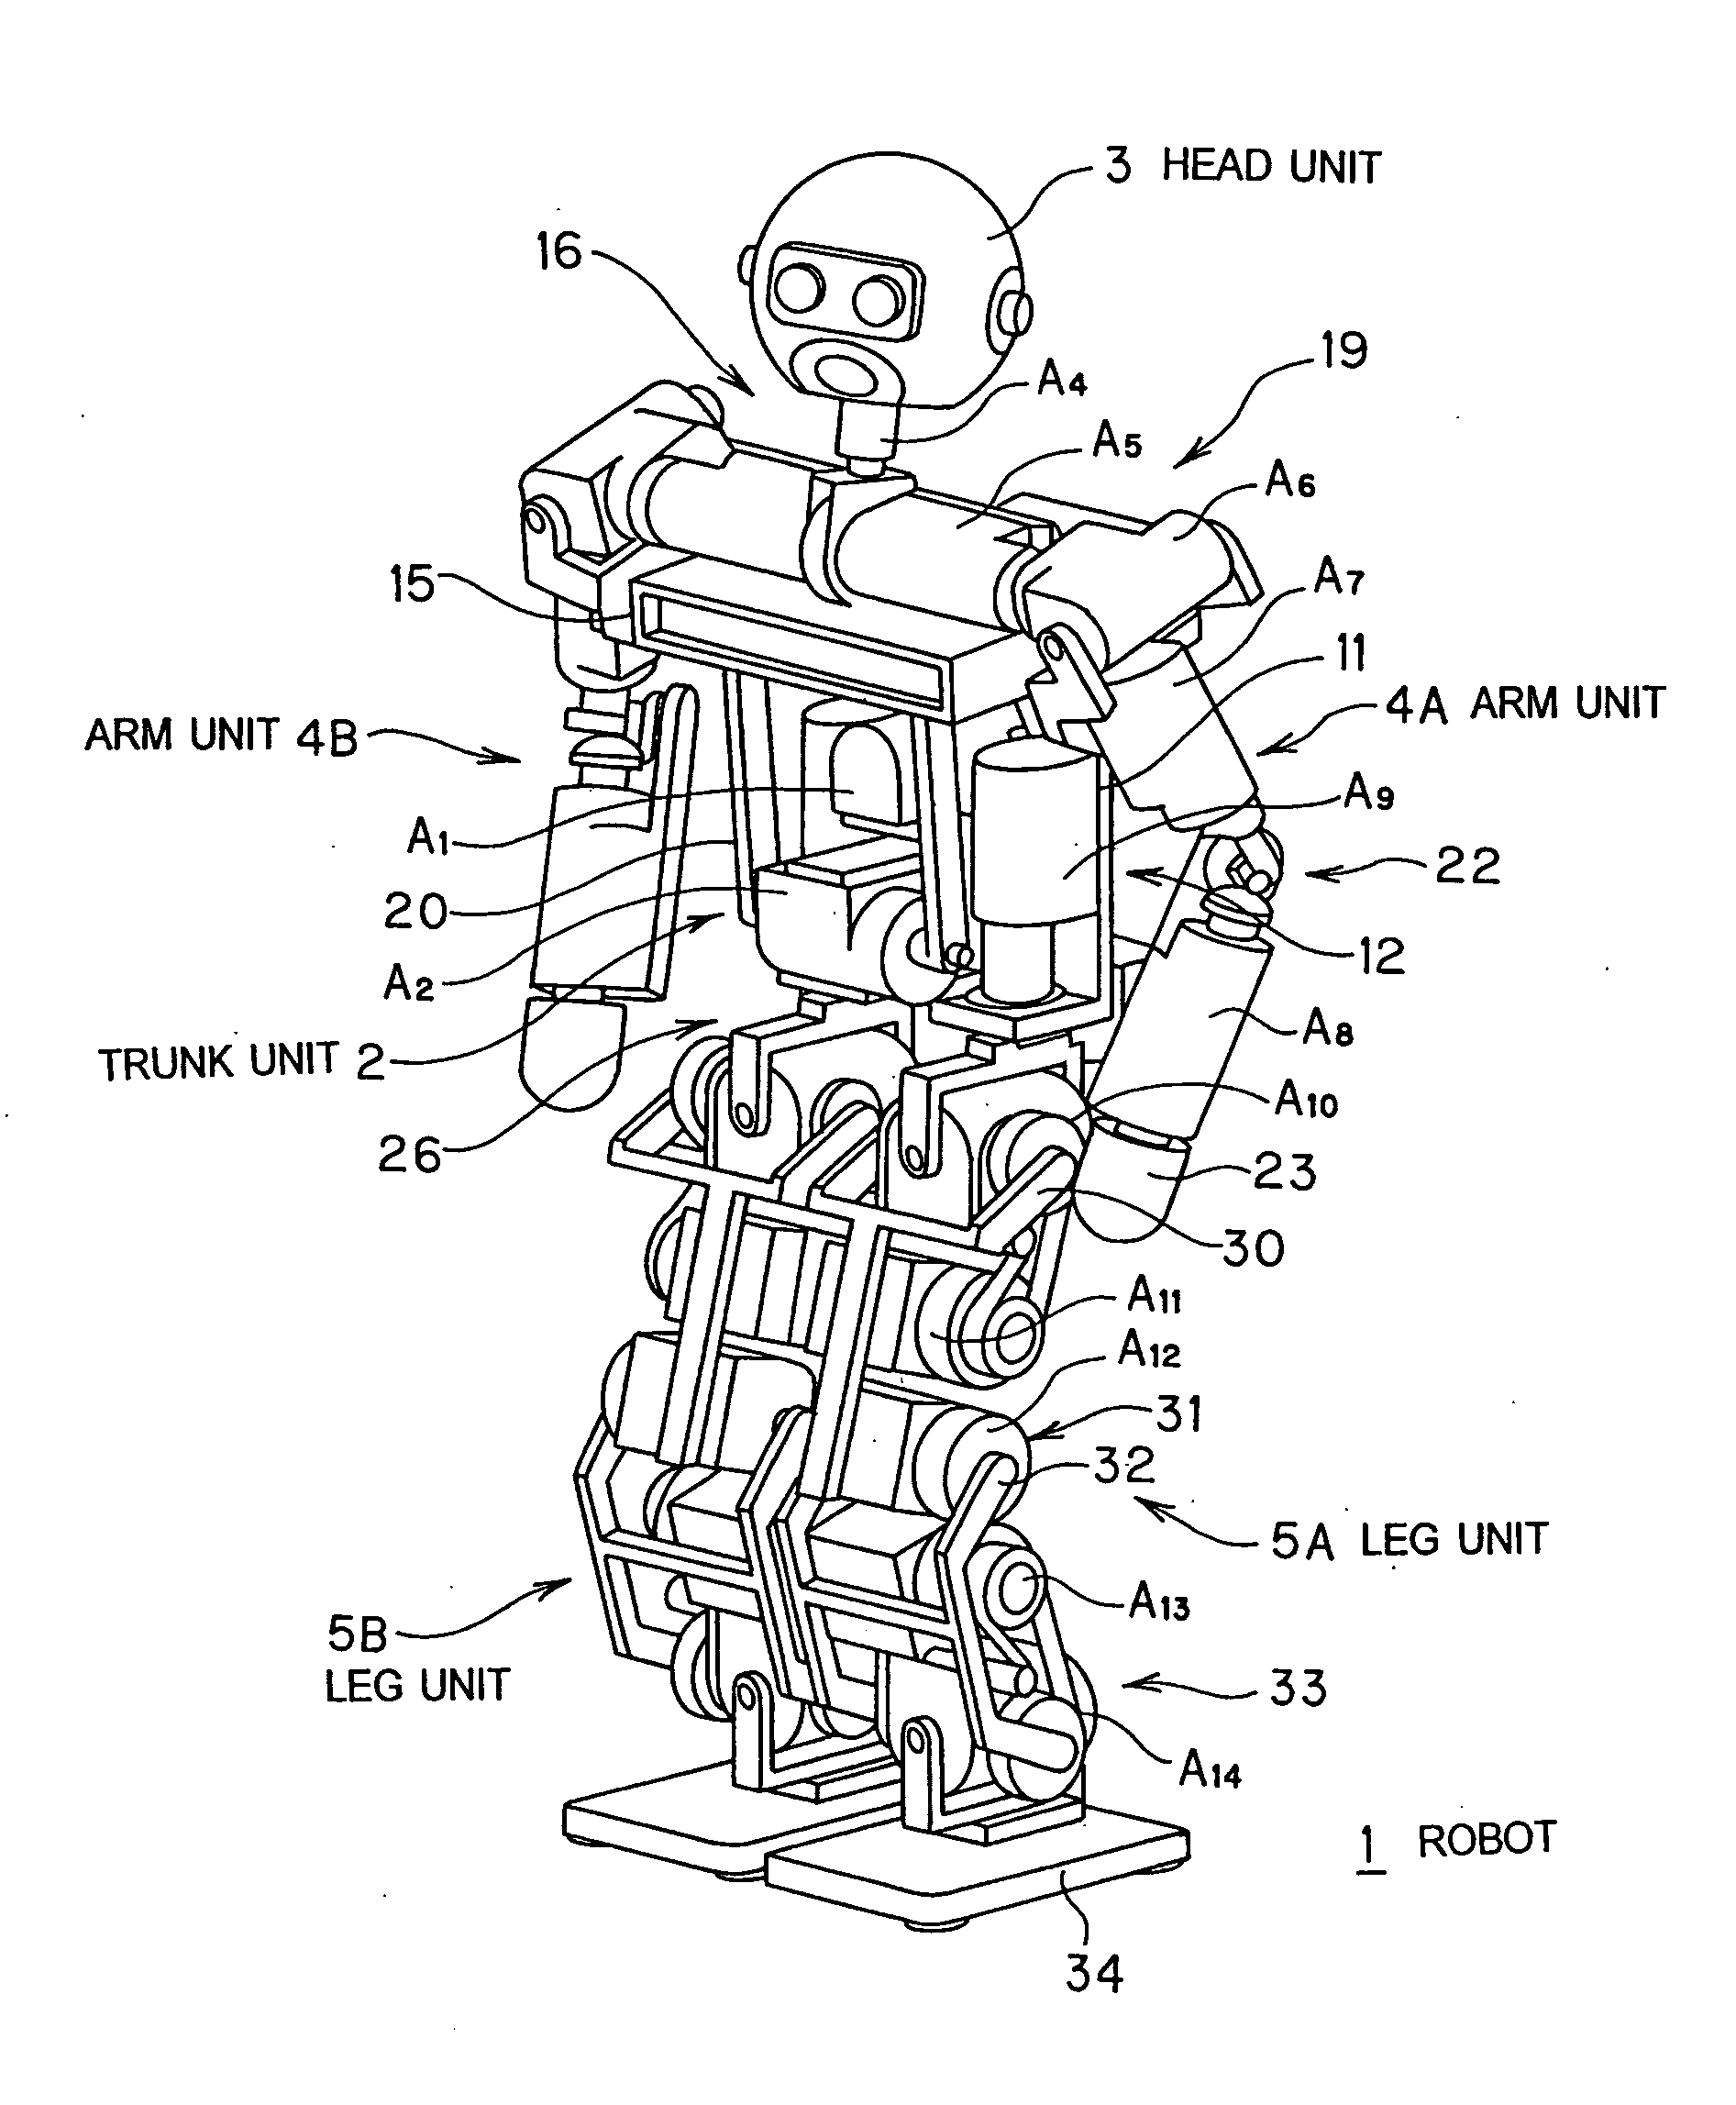 Robot and over-current protection device for a robot